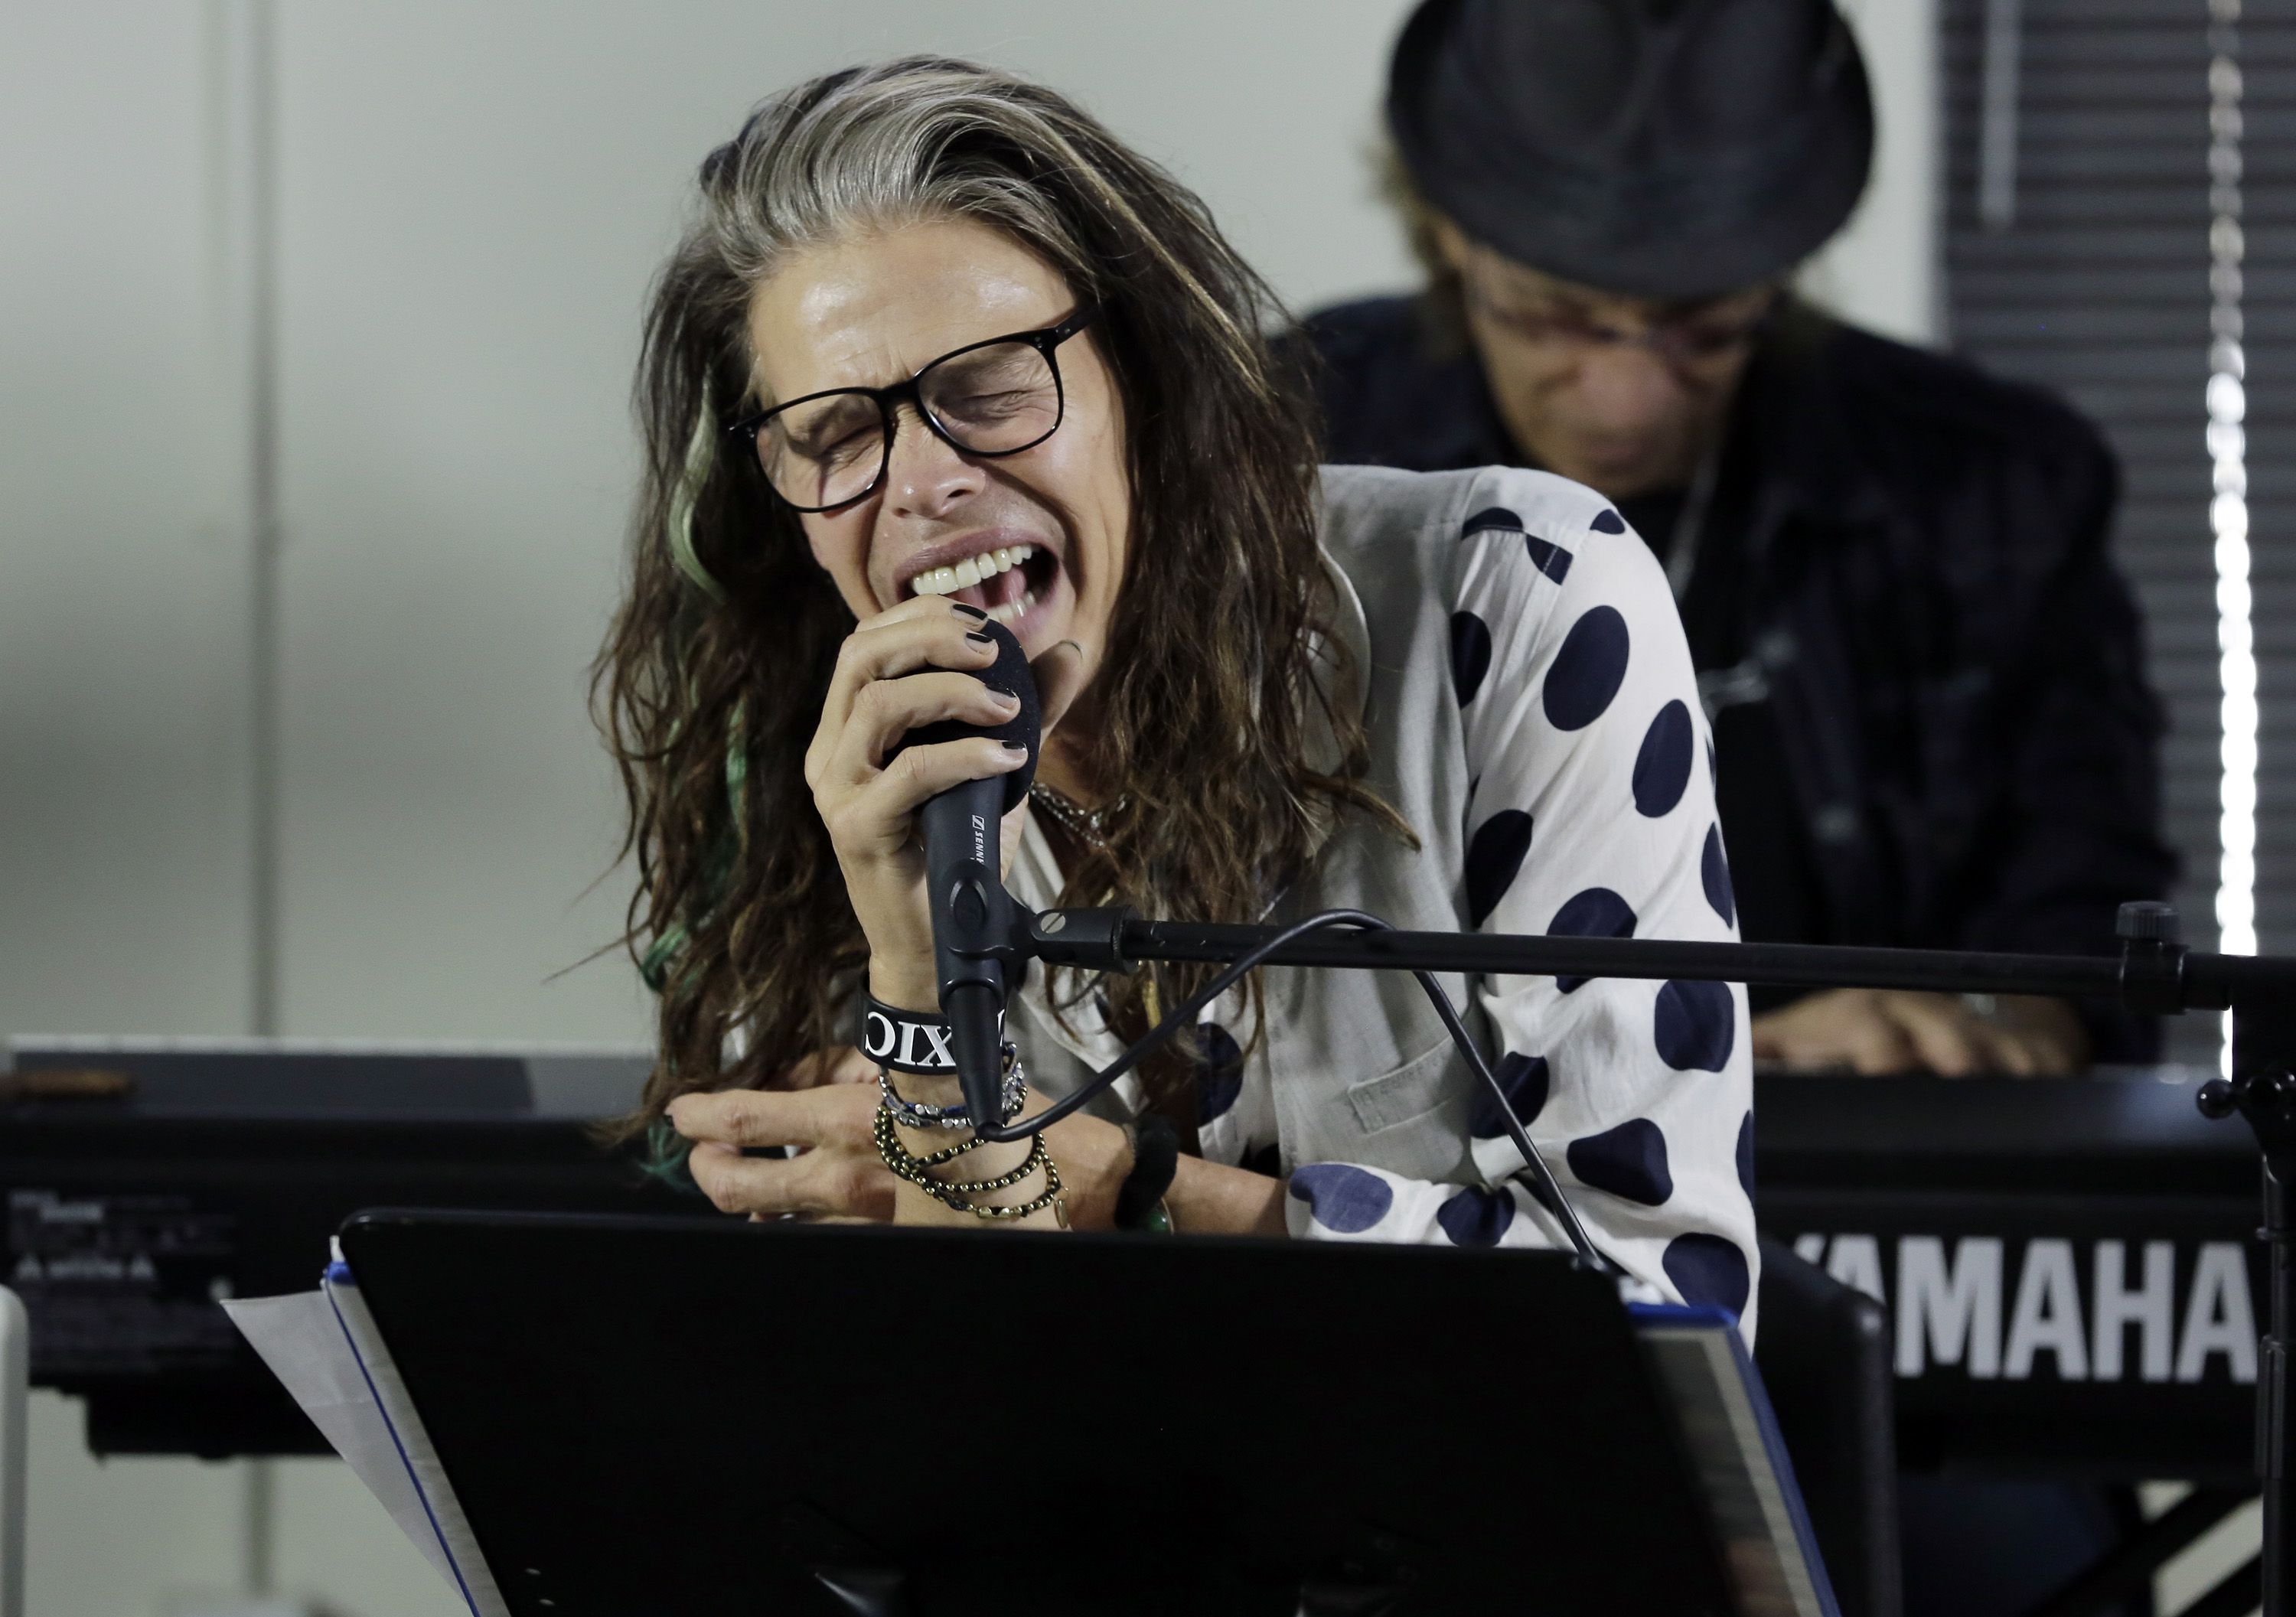 FORT LAUDERDALE, FL - NOVEMBER 10: (EXCLUSIVE COVERAGE) Steven Tyler performs and speaks with clients of Recovery Unplugged Treatment Center to provide the powerful, inspirational message of recovery through music with longtime friend, singer/songwriter, Richie Supa on November 10, 2014 in Fort Lauderdale, Florida. (Photo by Alexander Tamargo/Getty Images for Recovery Unplugged)